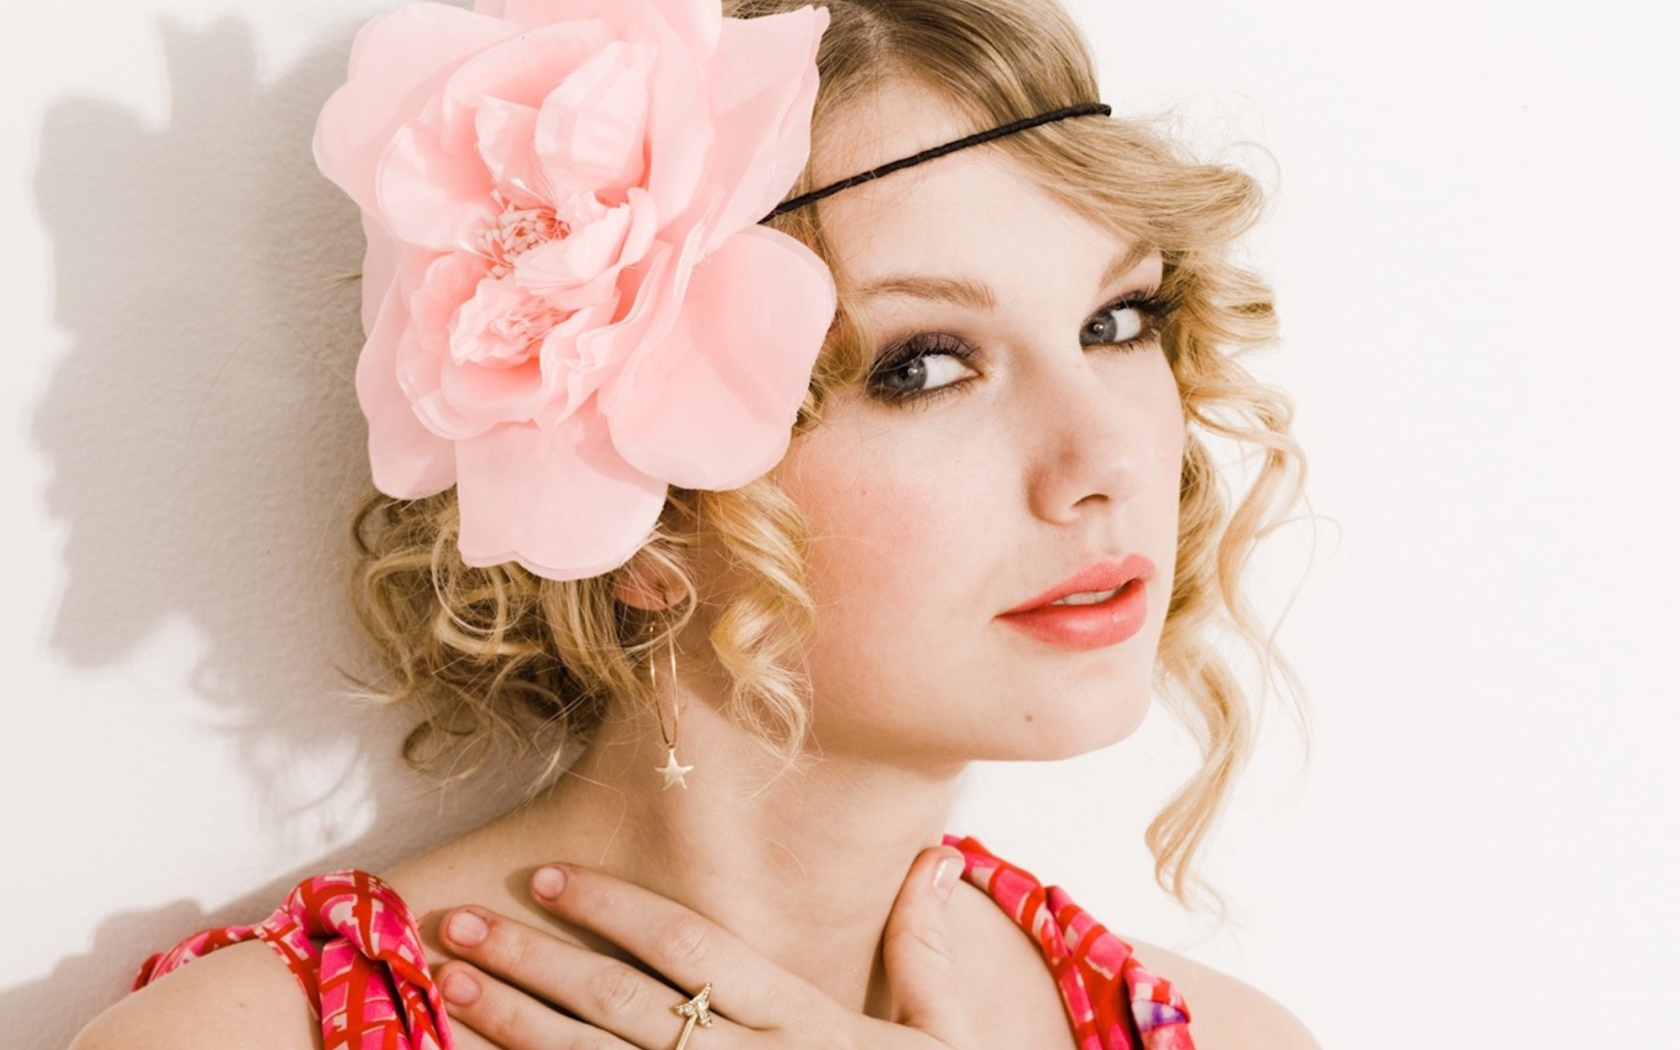 Taylor Swift With Pink Rose On Head wallpaper 1680x1050